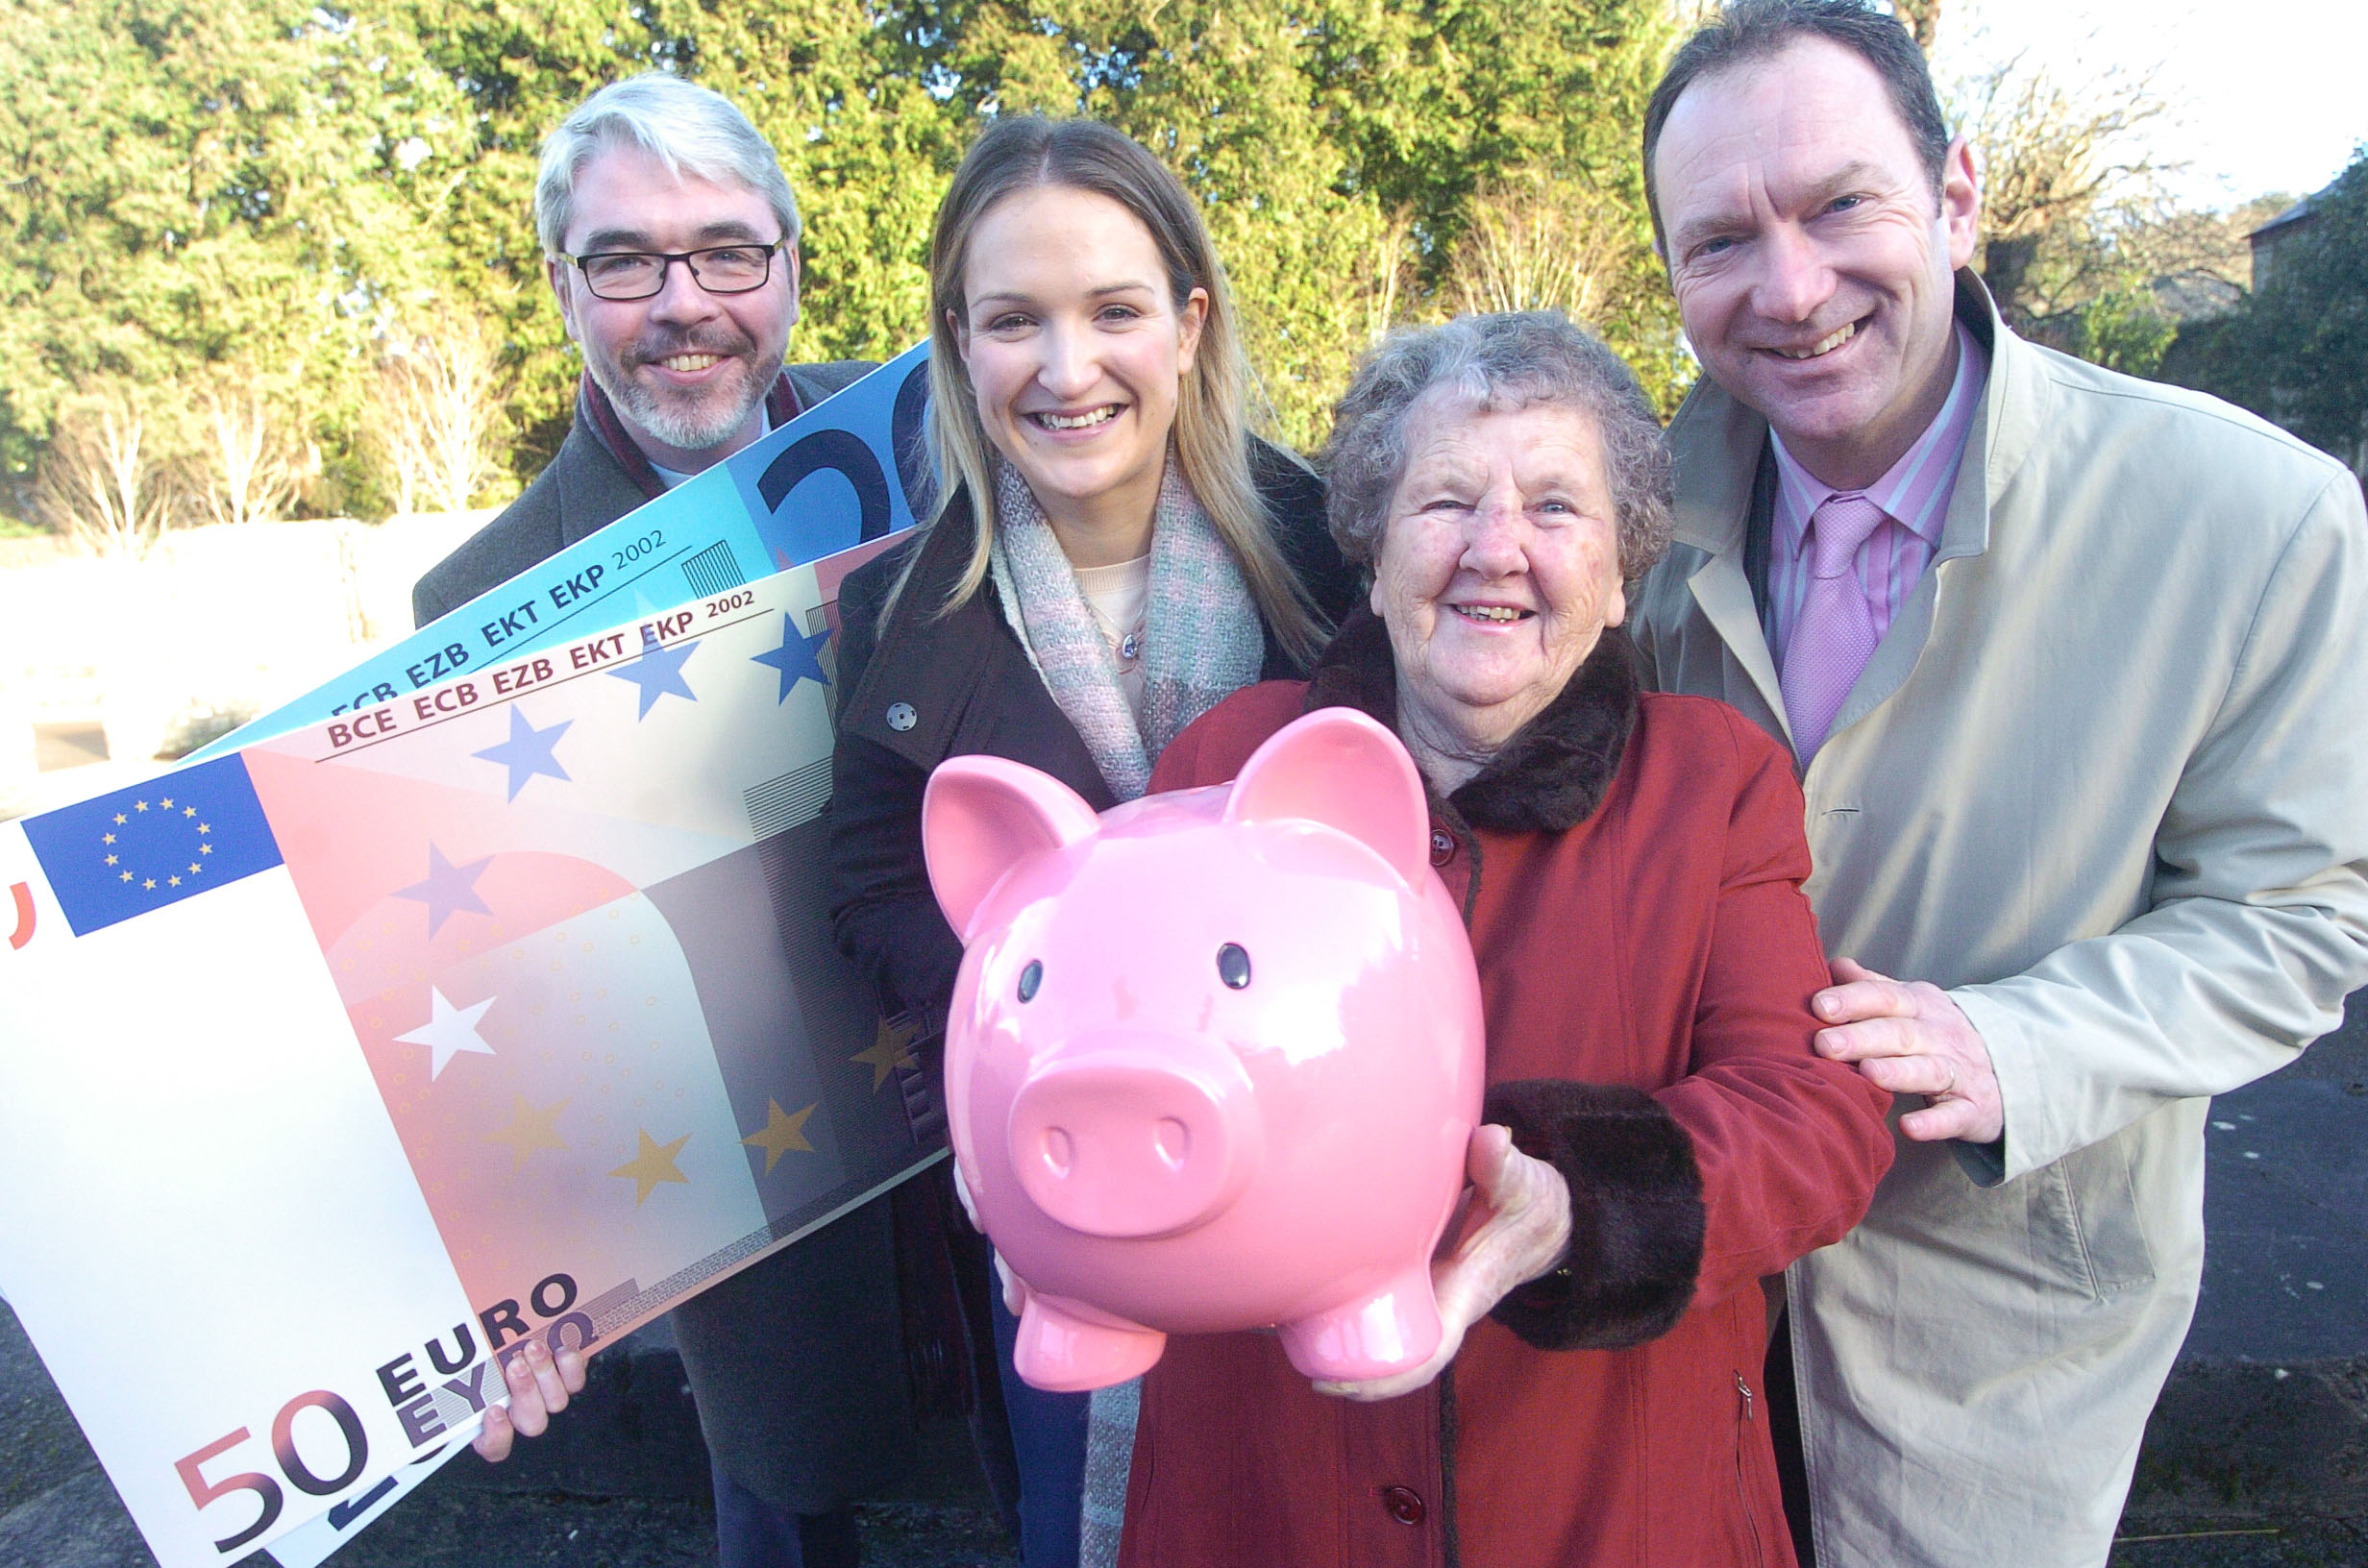 Age Action’s Justin Moran, Minister Helen McEntee and David Blevings of OFTEC with Joy Cassidy from Slane launching the guide. Credit Seamus Farrelly